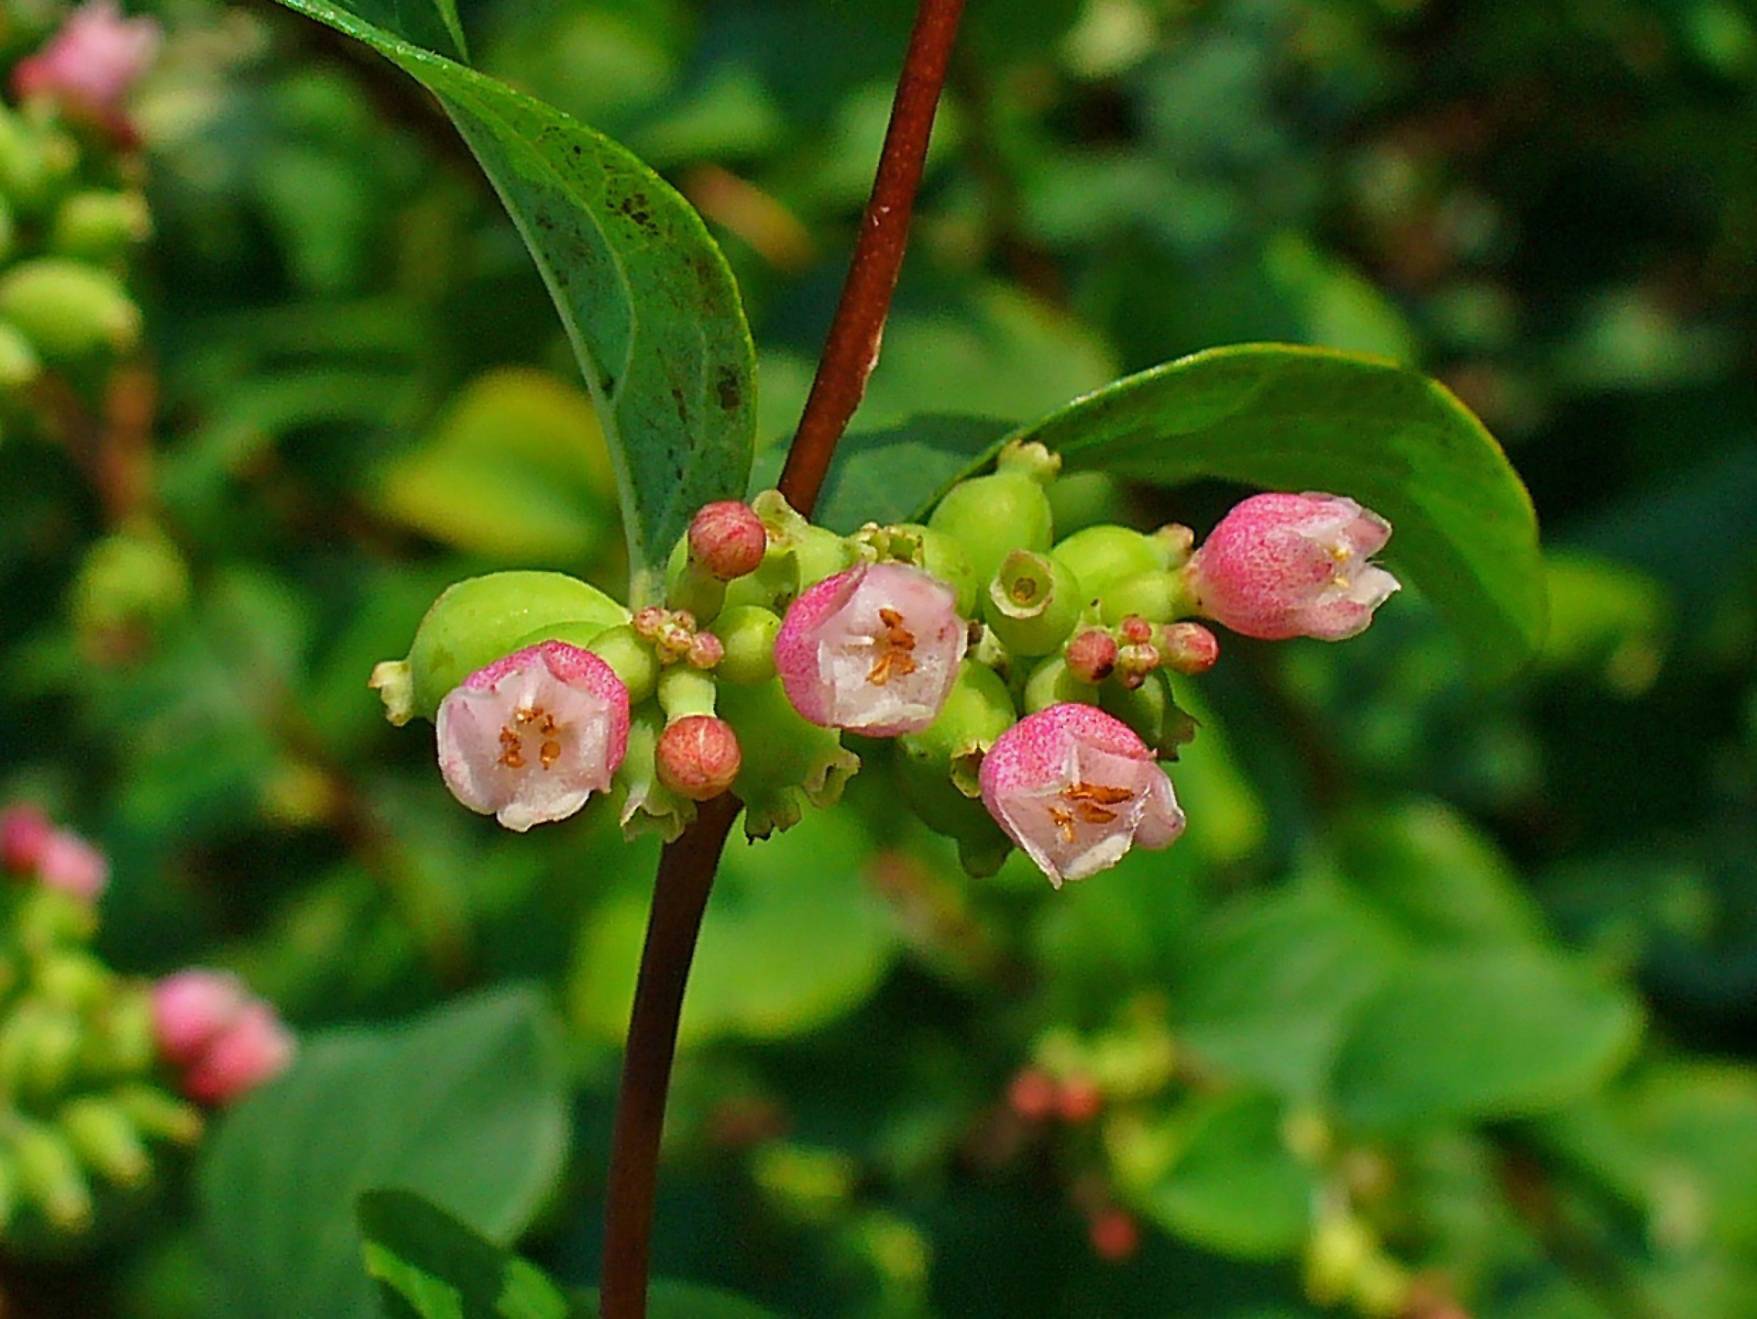 pink-white flowers with orange anthers, white filaments, lime-pink buds, green leaves and burgundy branches